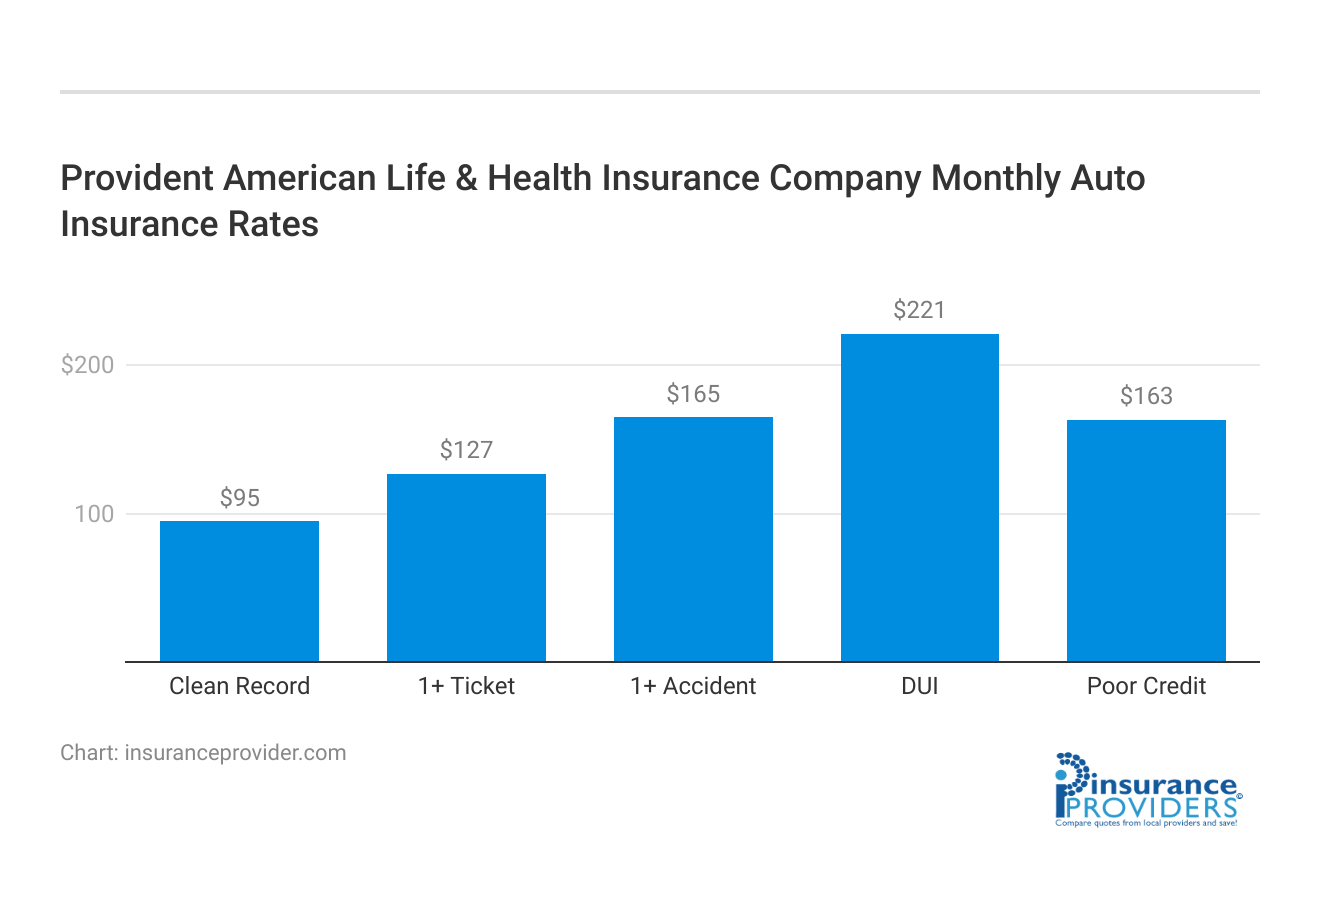 <h3>Provident American Life & Health Insurance Company Monthly Auto Insurance Rates</h3>